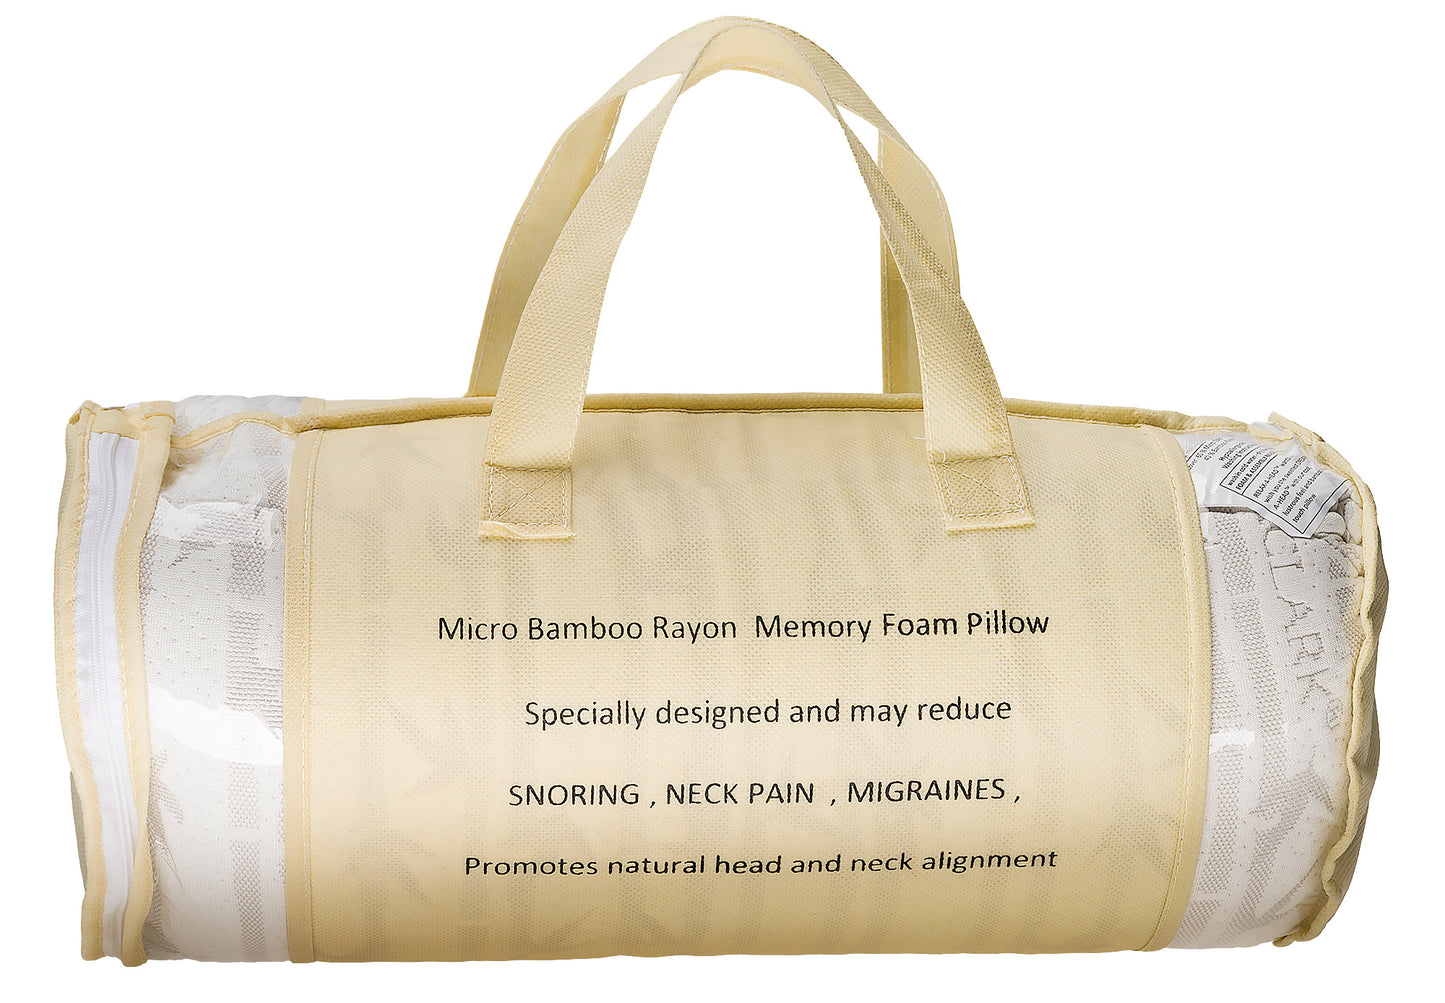 Clara Clark Shredded Memory Foam Pillow with a Luxury Designed Rayon Made from Satins Cover